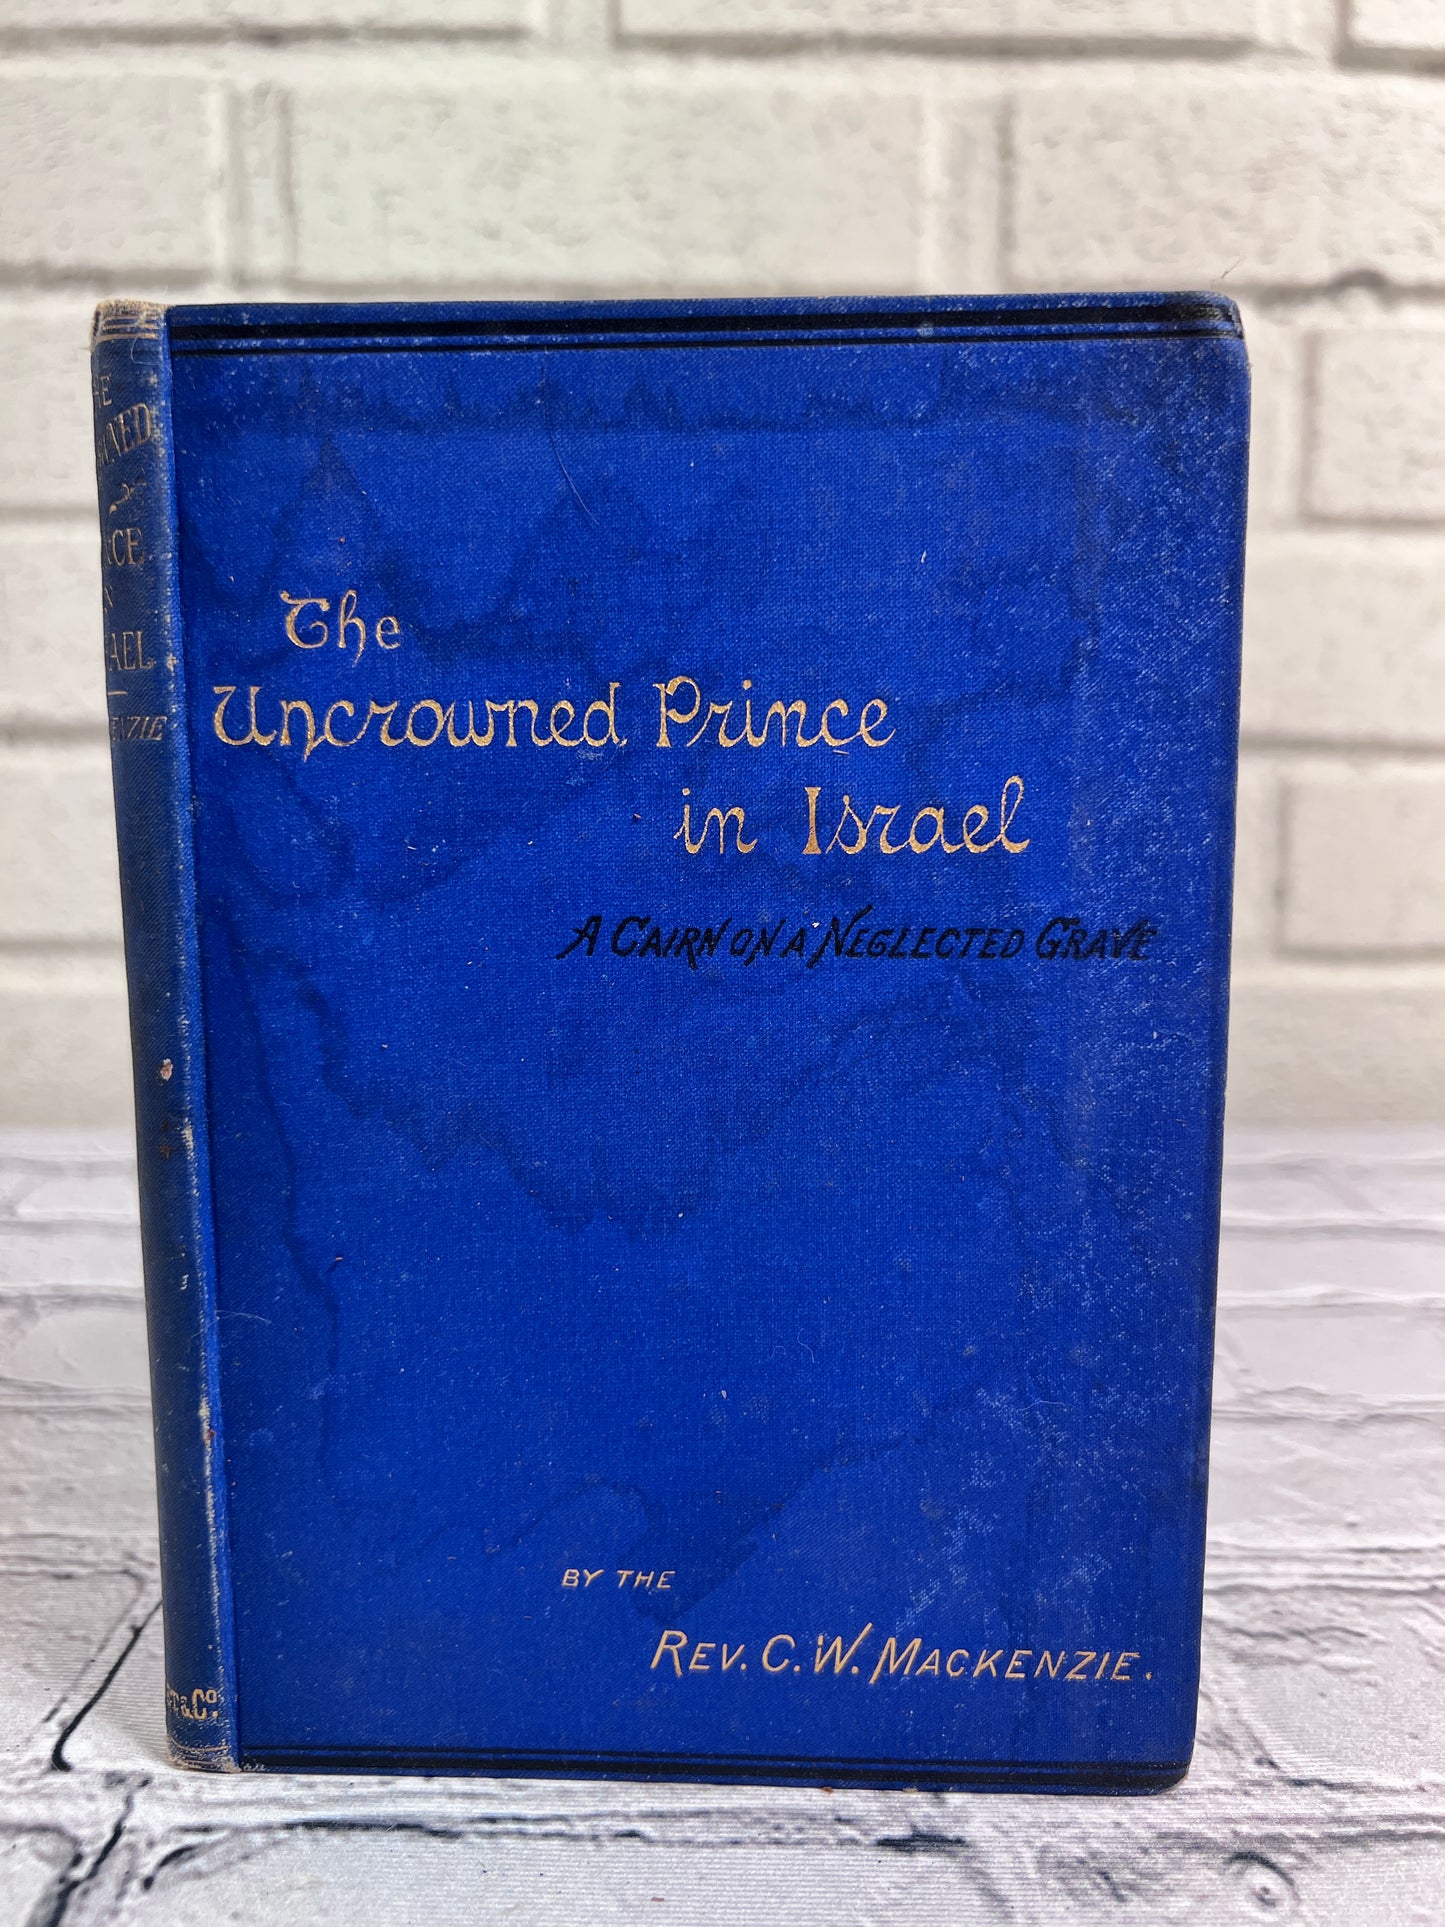 The Uncrowned Prince of Israel: A Cairn on A Neglected Grave by Mackenzie [1885]